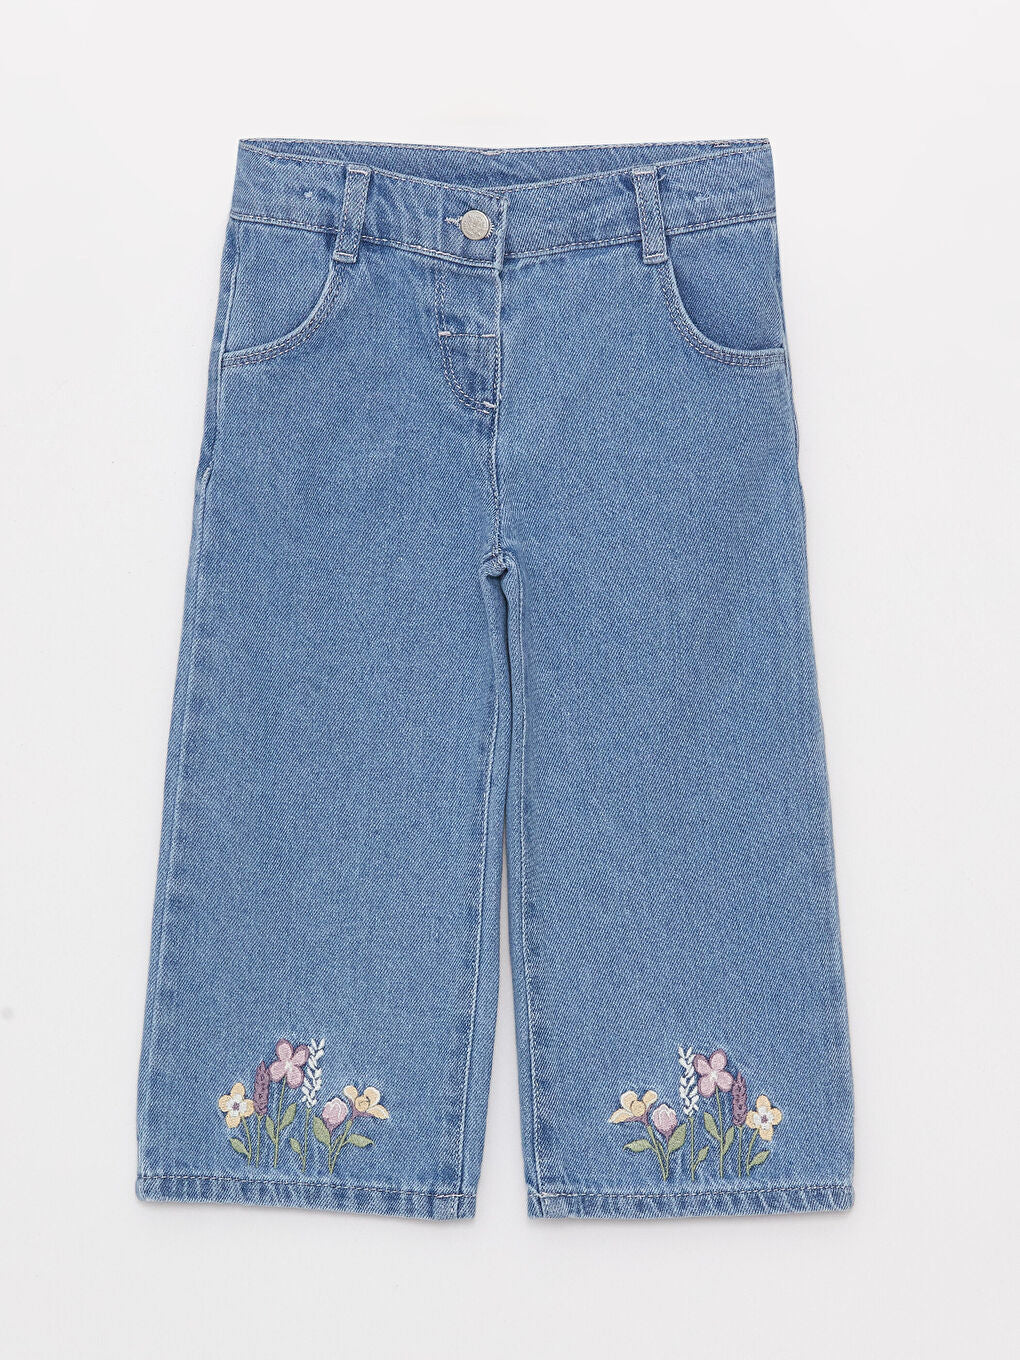 Embroidery Detailed Baby Girl Jean Trousers